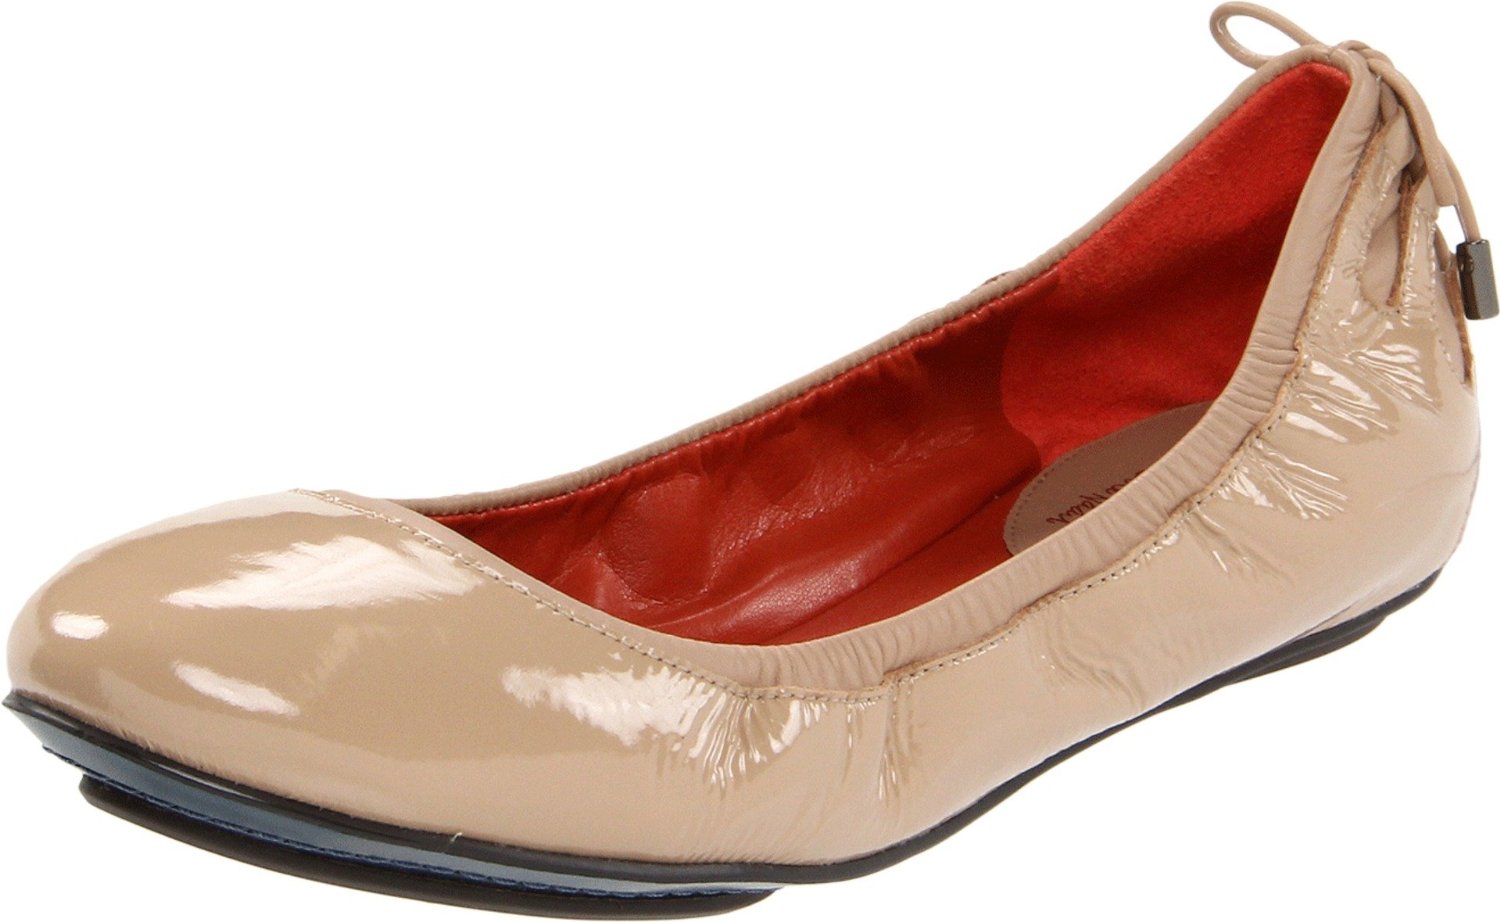 Cole haan Maria Sharapova Collection By Cole Haan Womens Air Bacara ...